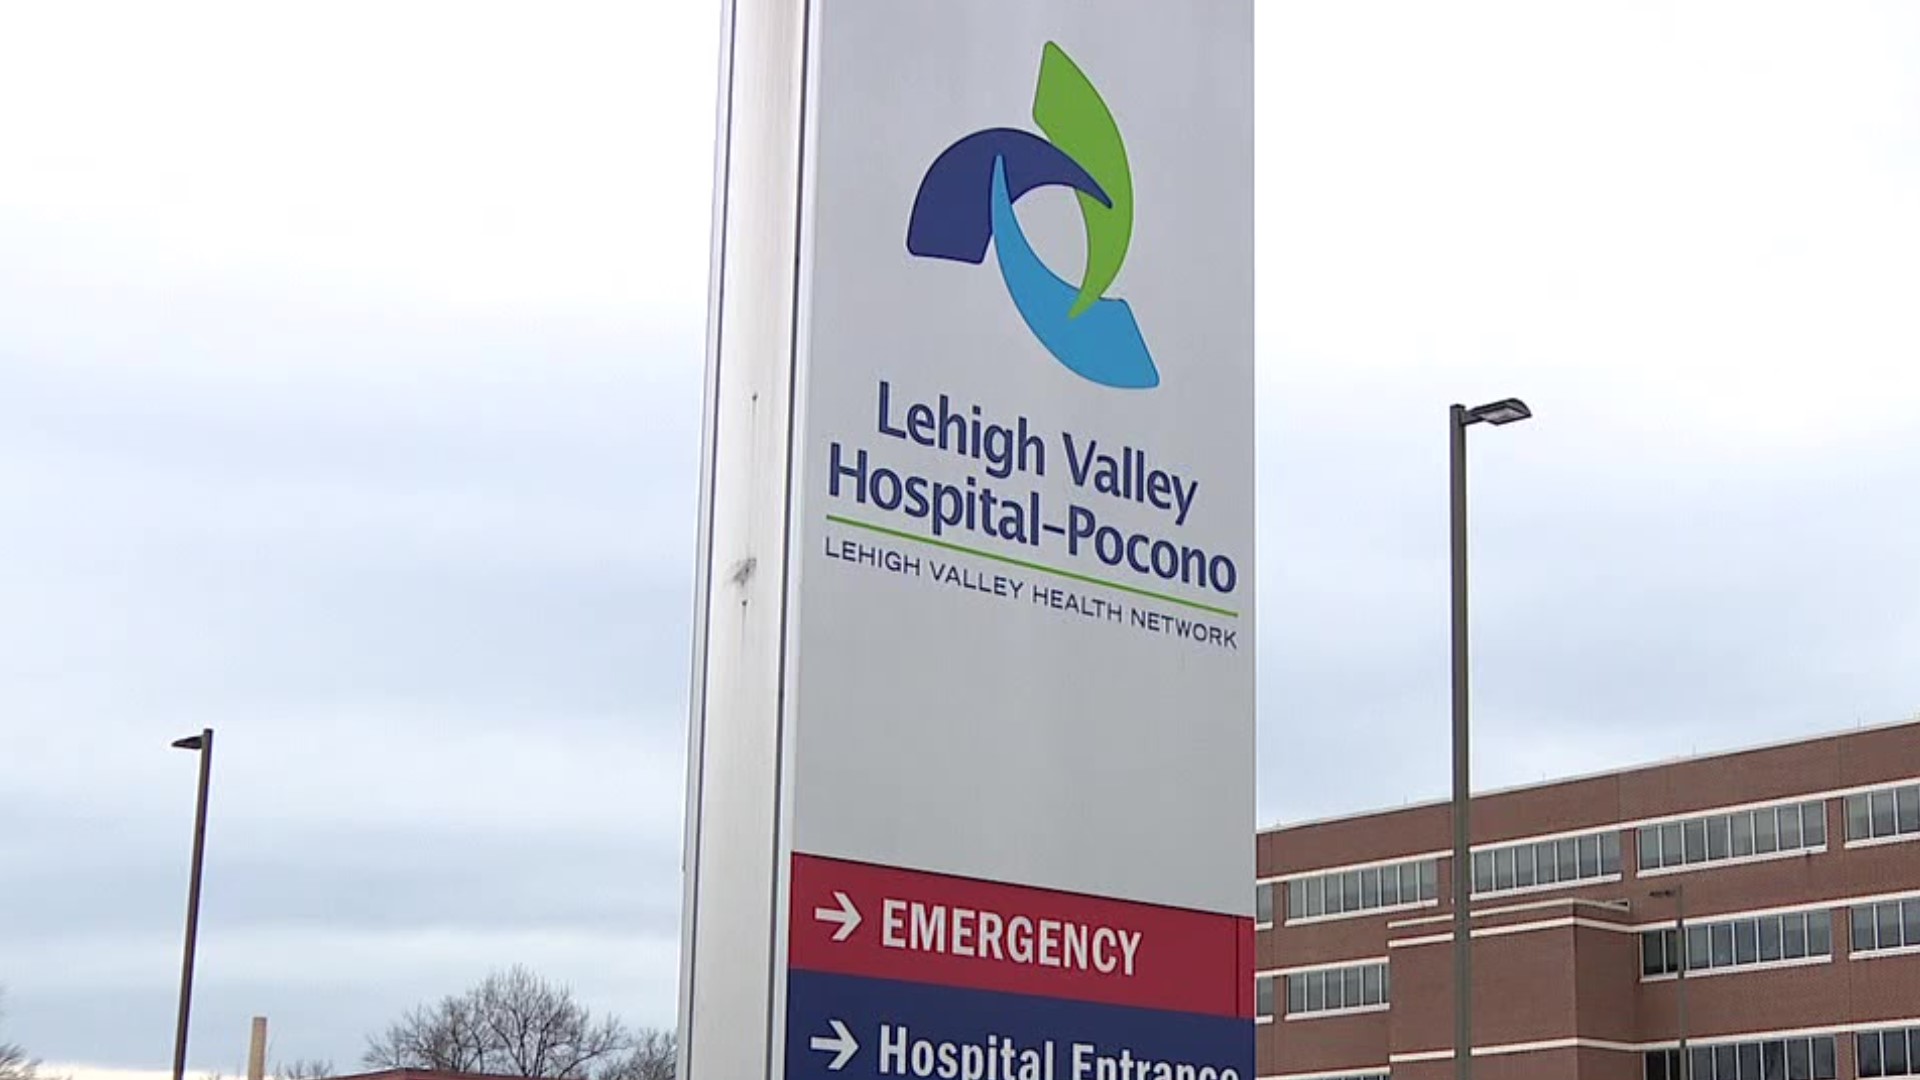 Lehigh Valley Hospital - Pocono in East Stroudsburg currently has 58 hospitalizations.  That's down from about 60 to 65 people they saw last week.